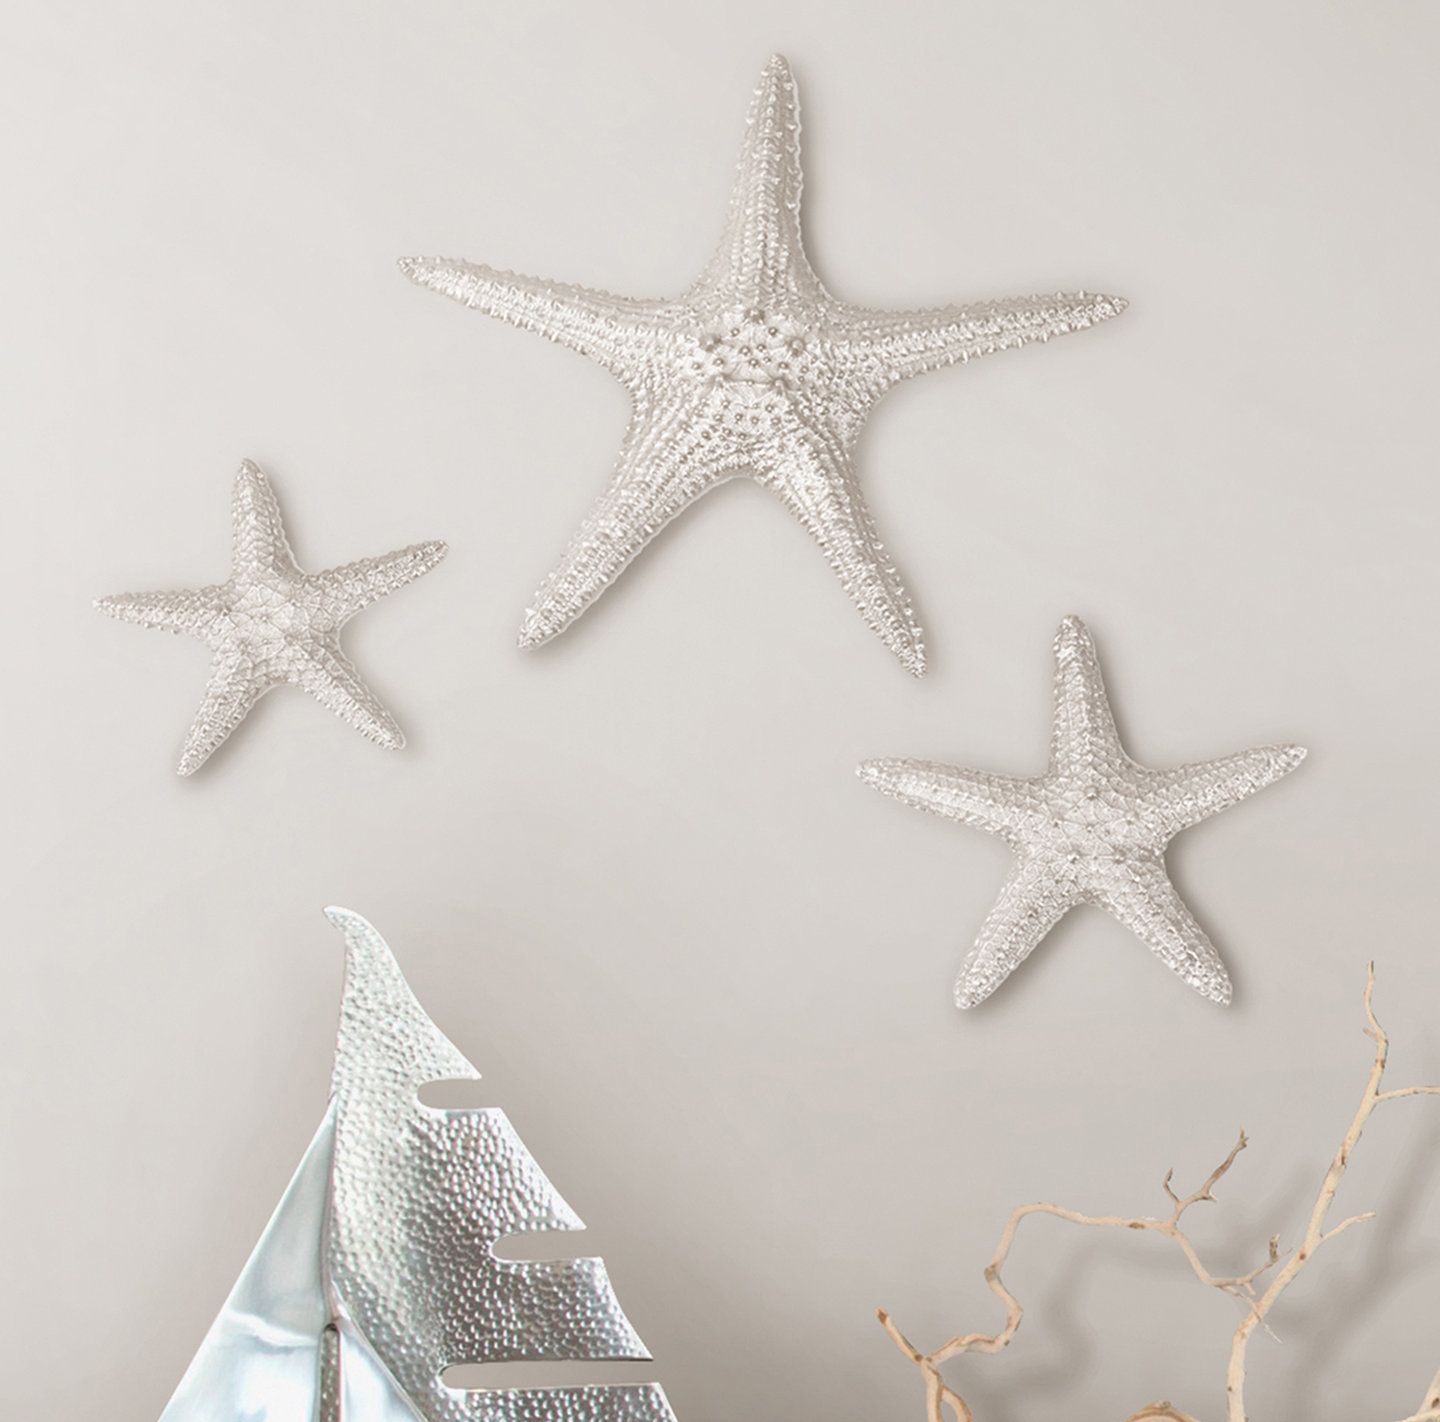 2020 American Pride 3d Wall Decor With Fetco Home Decor Yelton 3 Piece Starfish Wall Décor Set & Reviews (View 17 of 20)